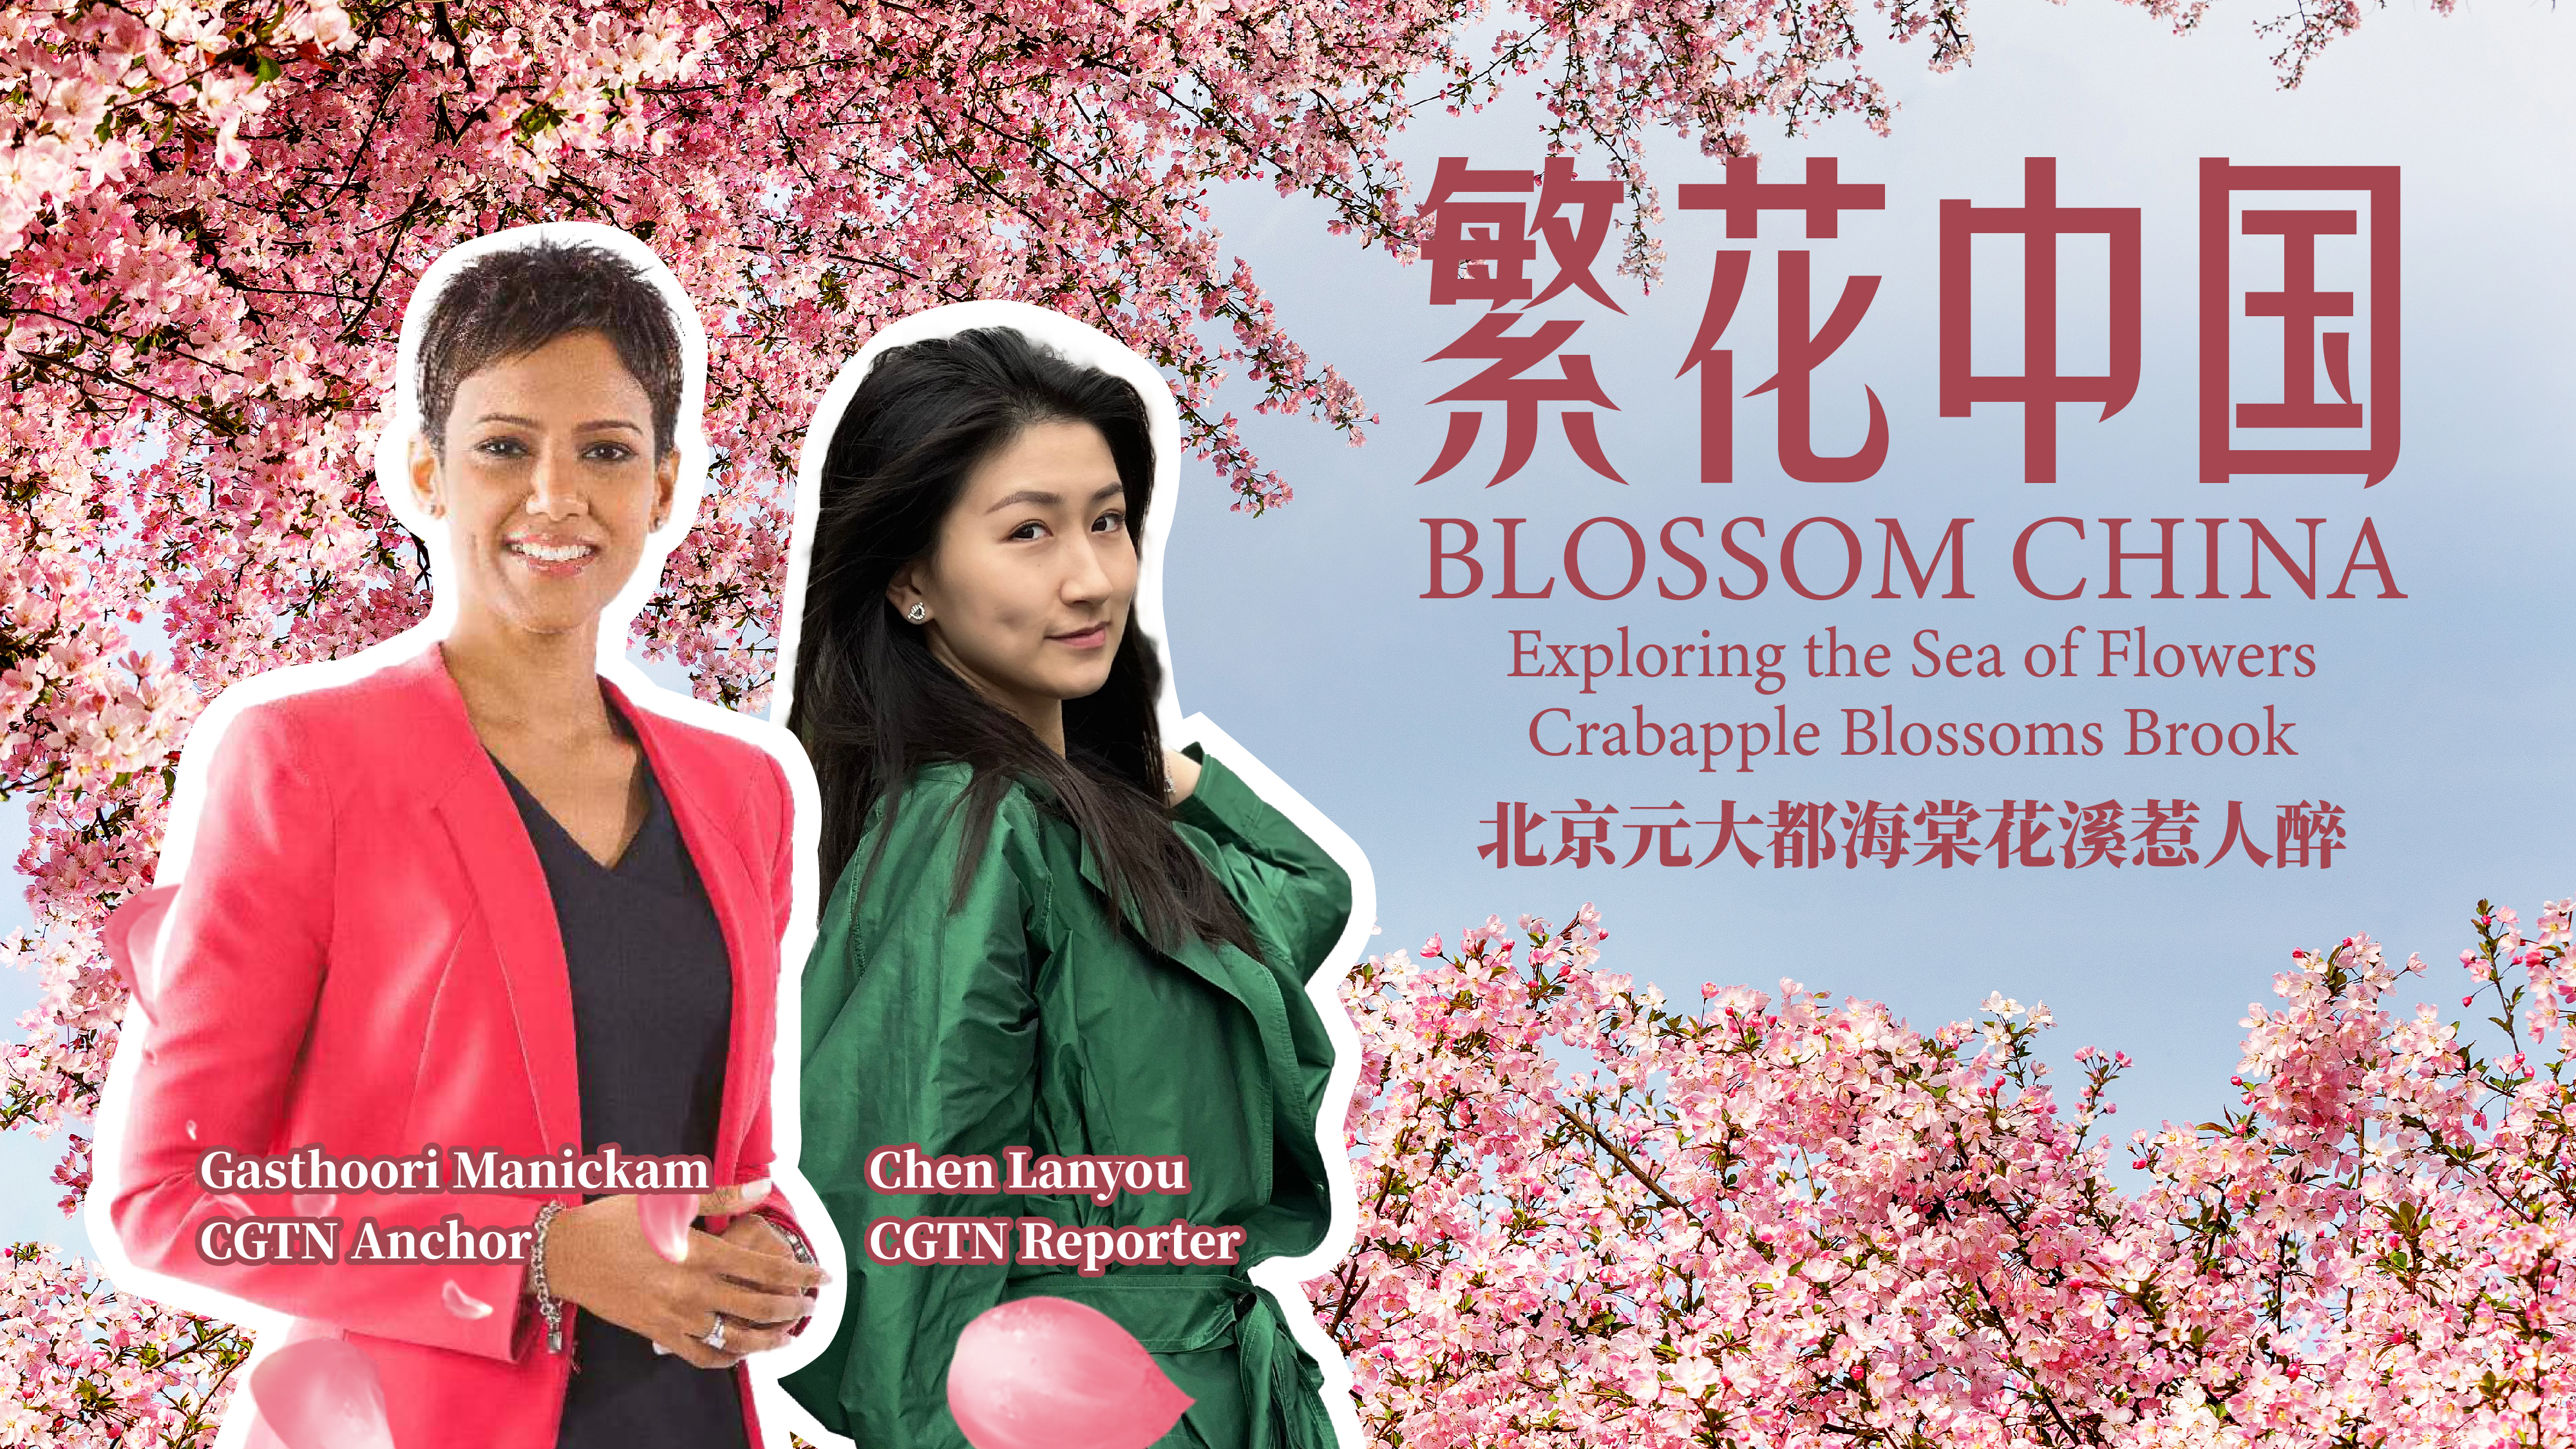 Live: Blossom China – Crabapple Flowers Blossom Brook in Beijing